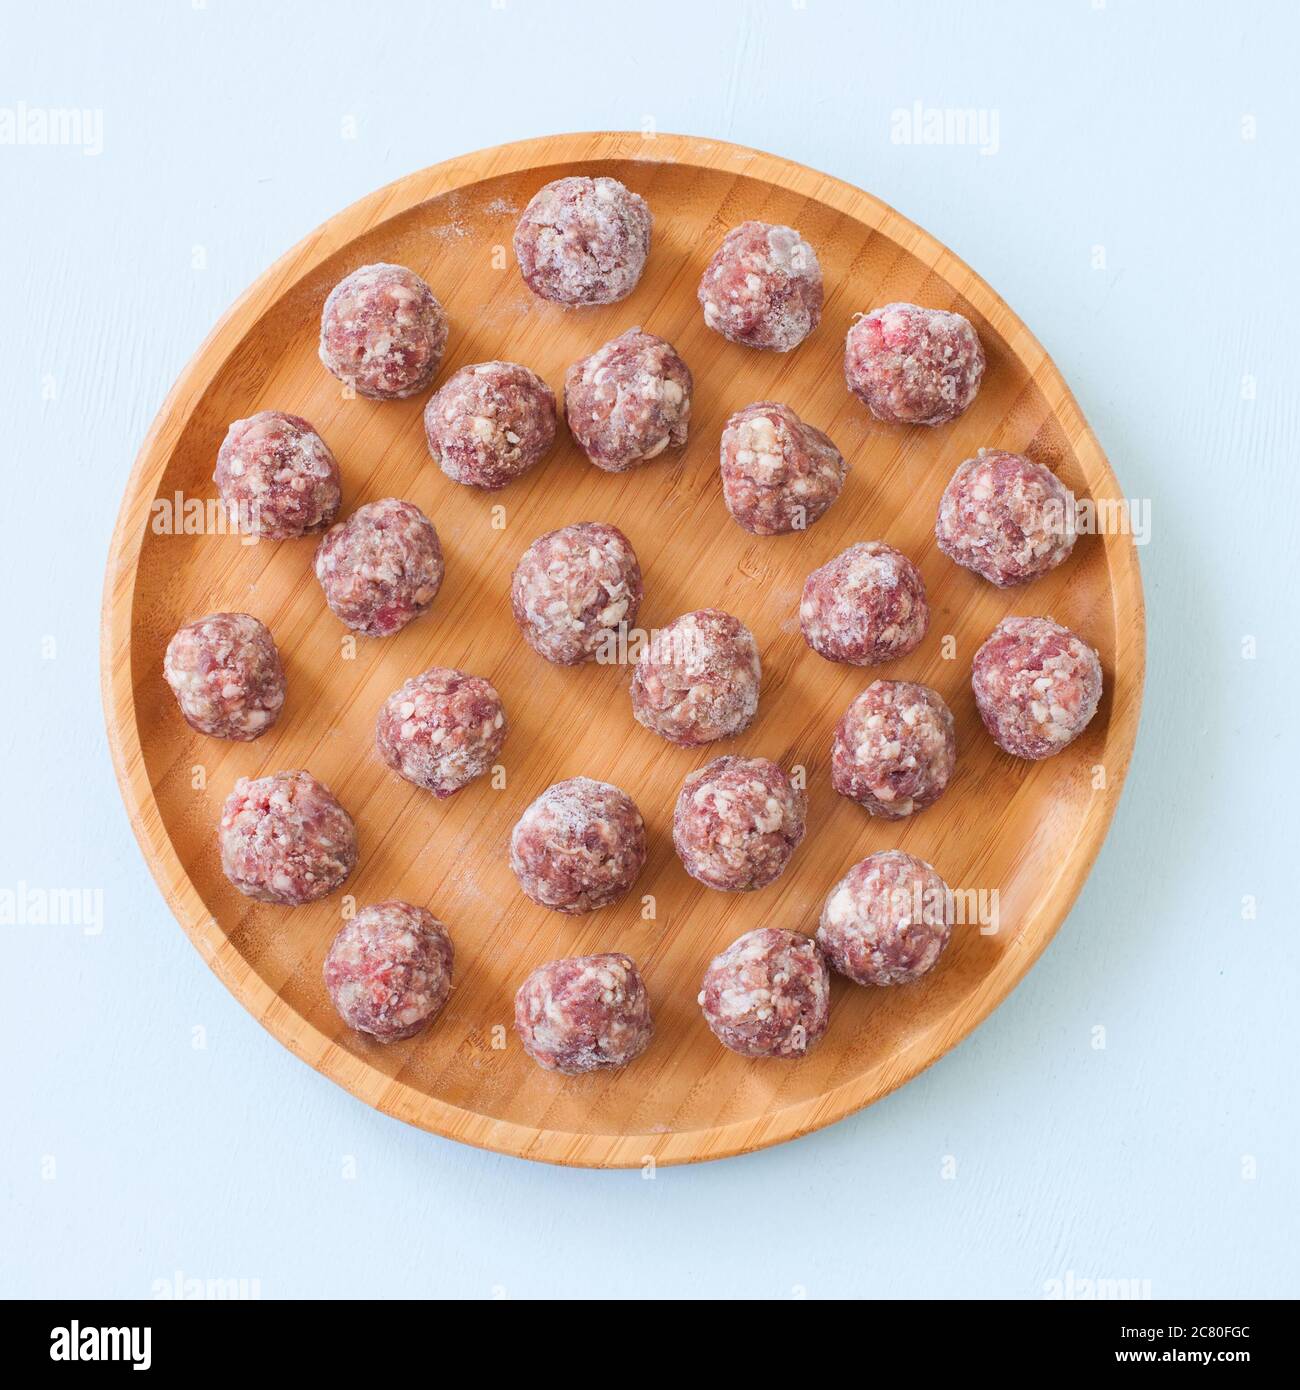 Raw meatballs on a wooden plate. Top view Stock Photo